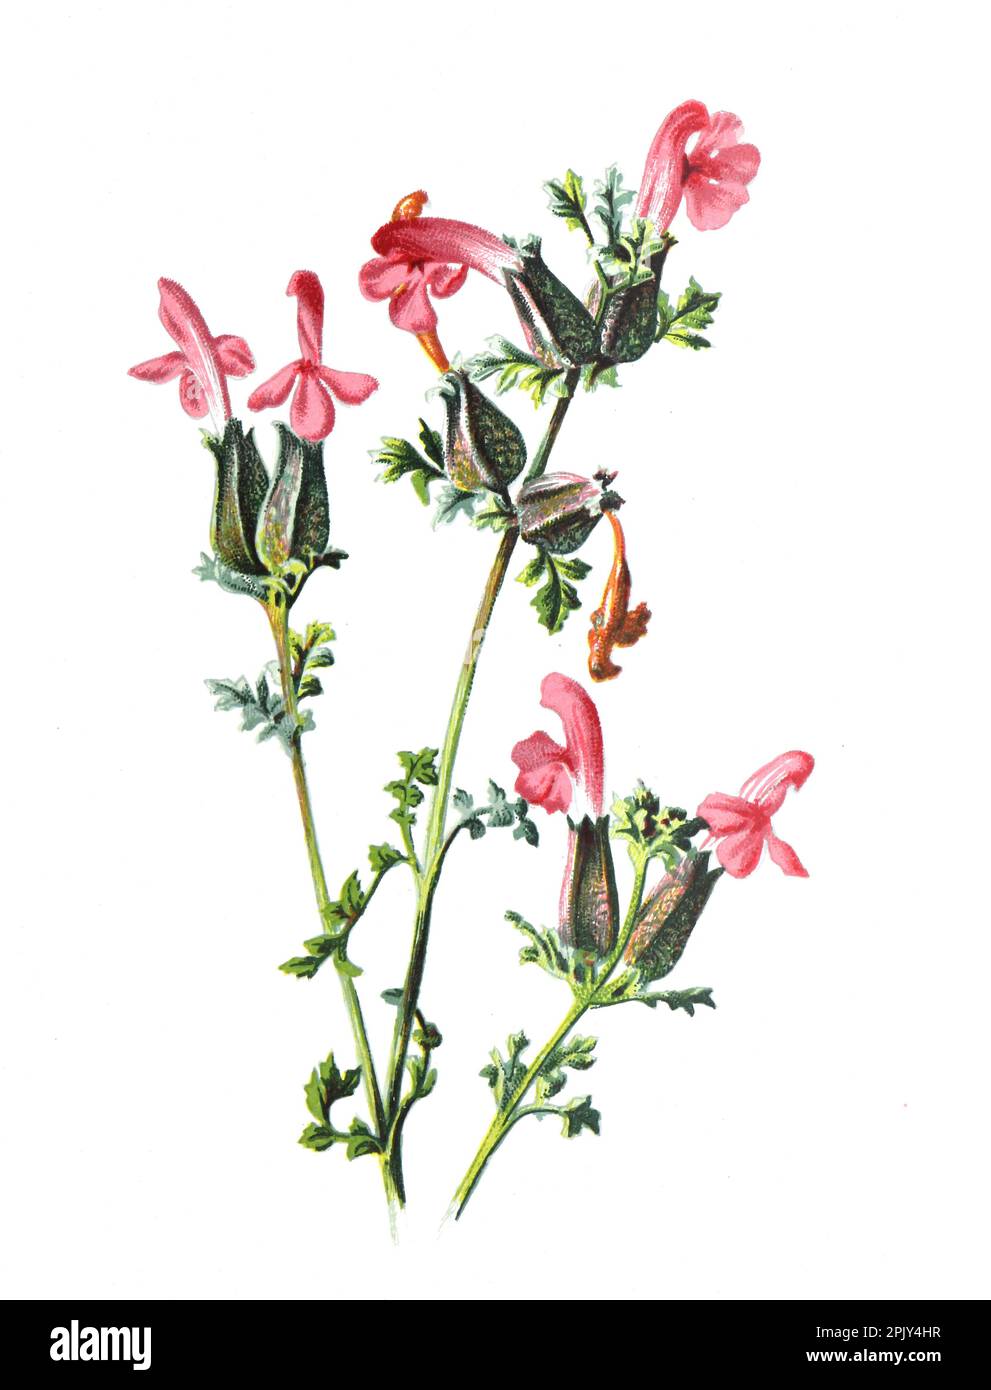 Pedicularis palustris, commonly known as marsh lousewort or red rattle flower. Vintage hand drawn wild field flowers illustration. Stock Photo